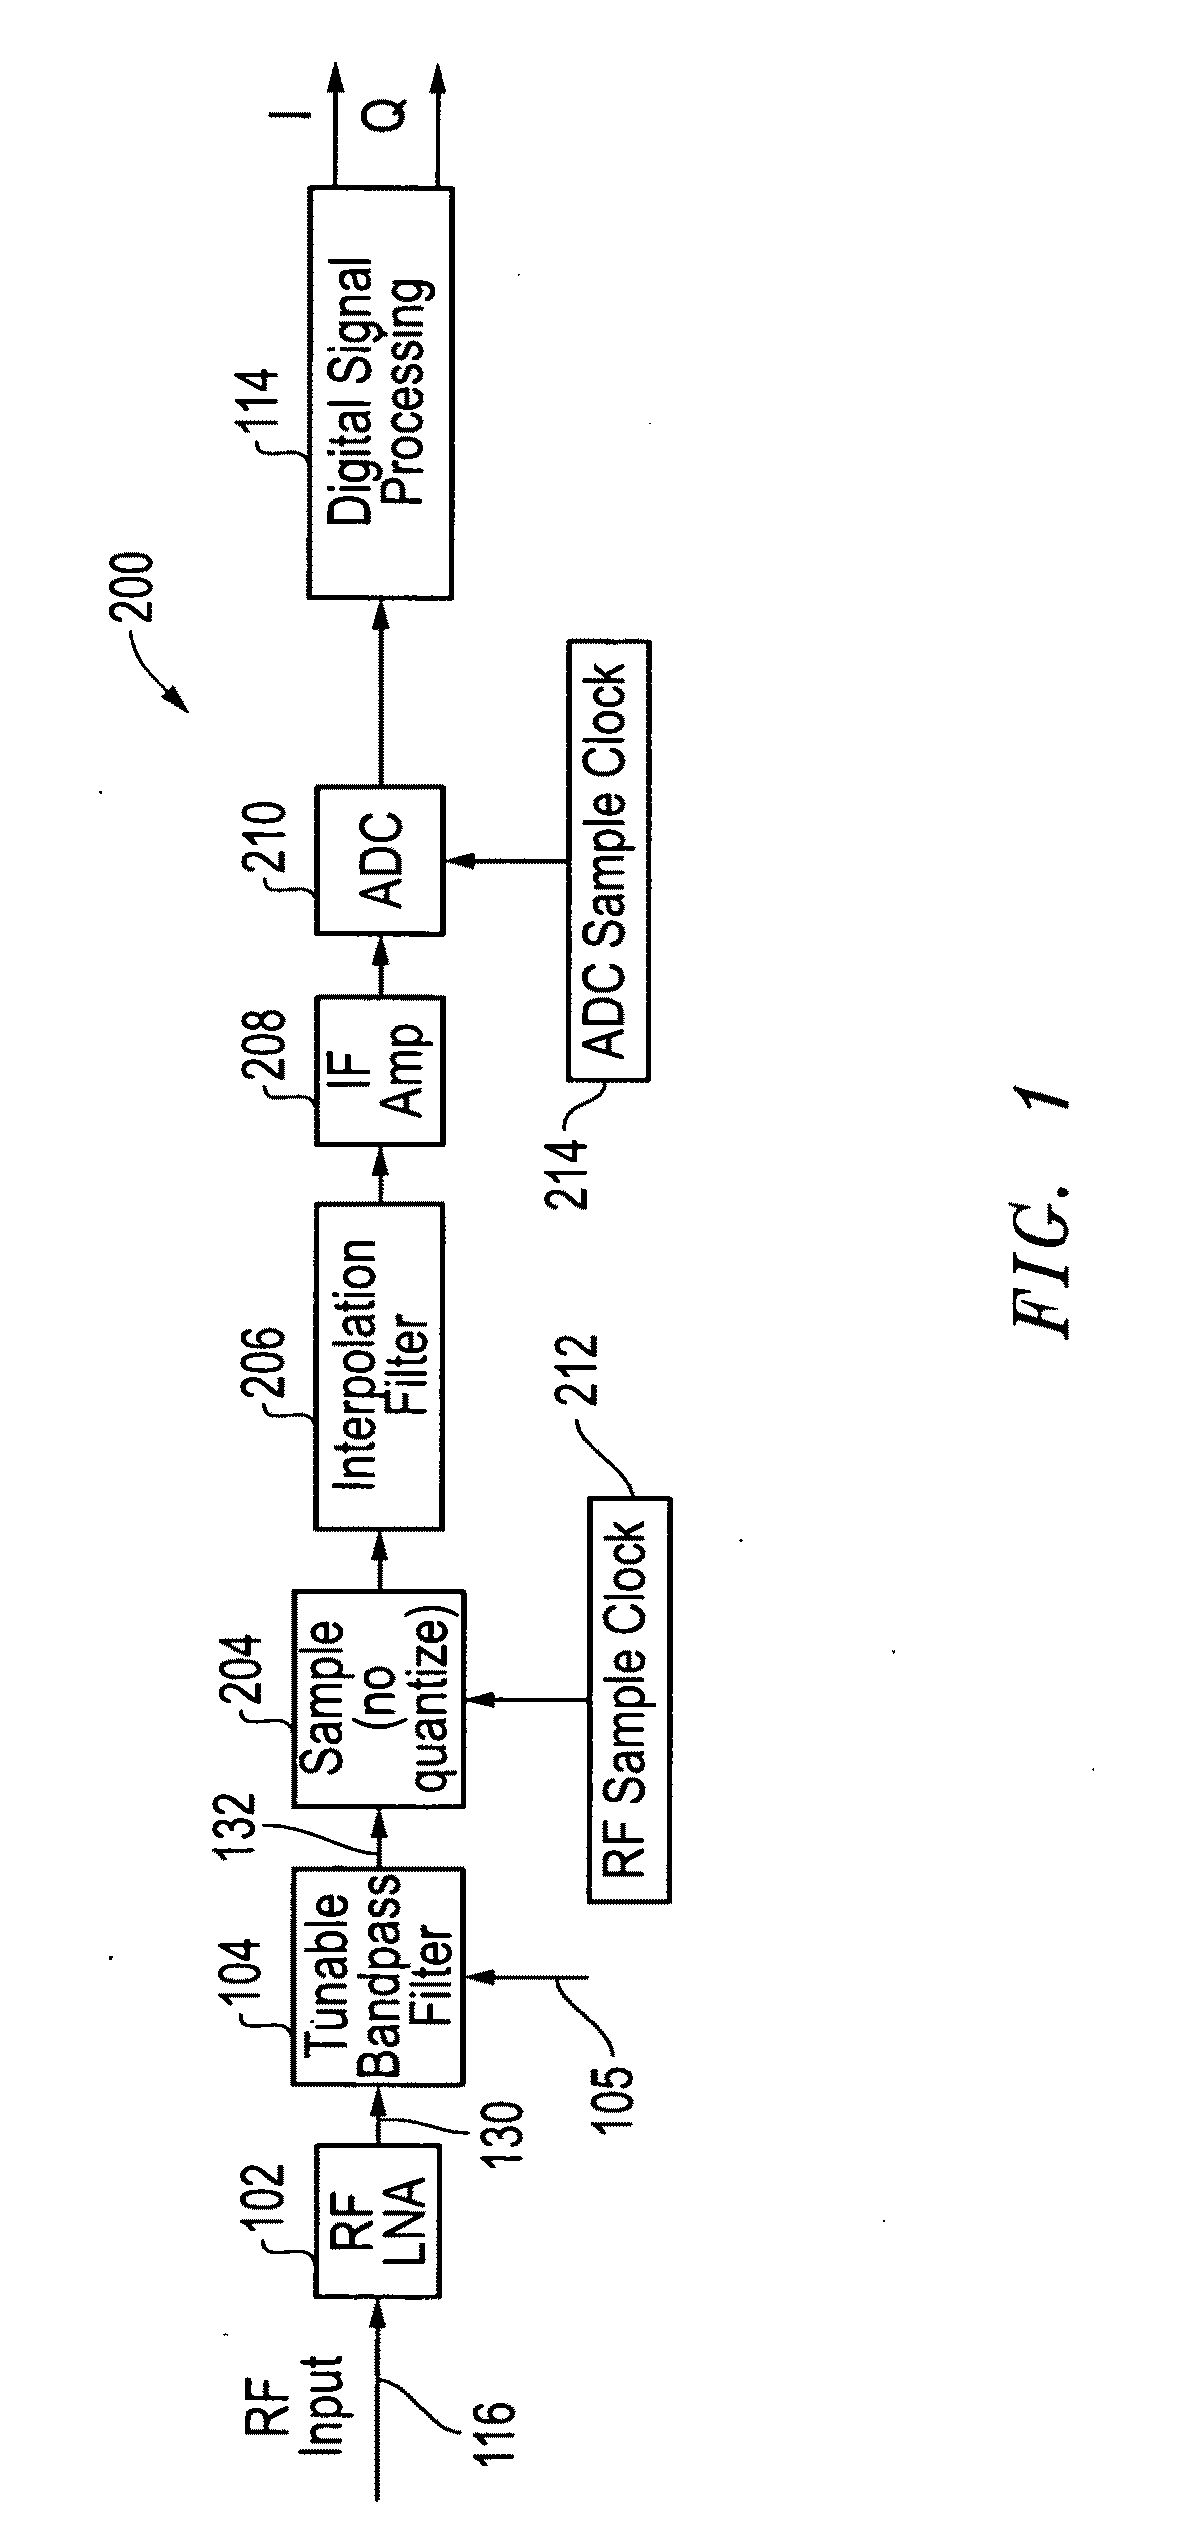 System and method for improved spur reduction in direct RF receiver architectures